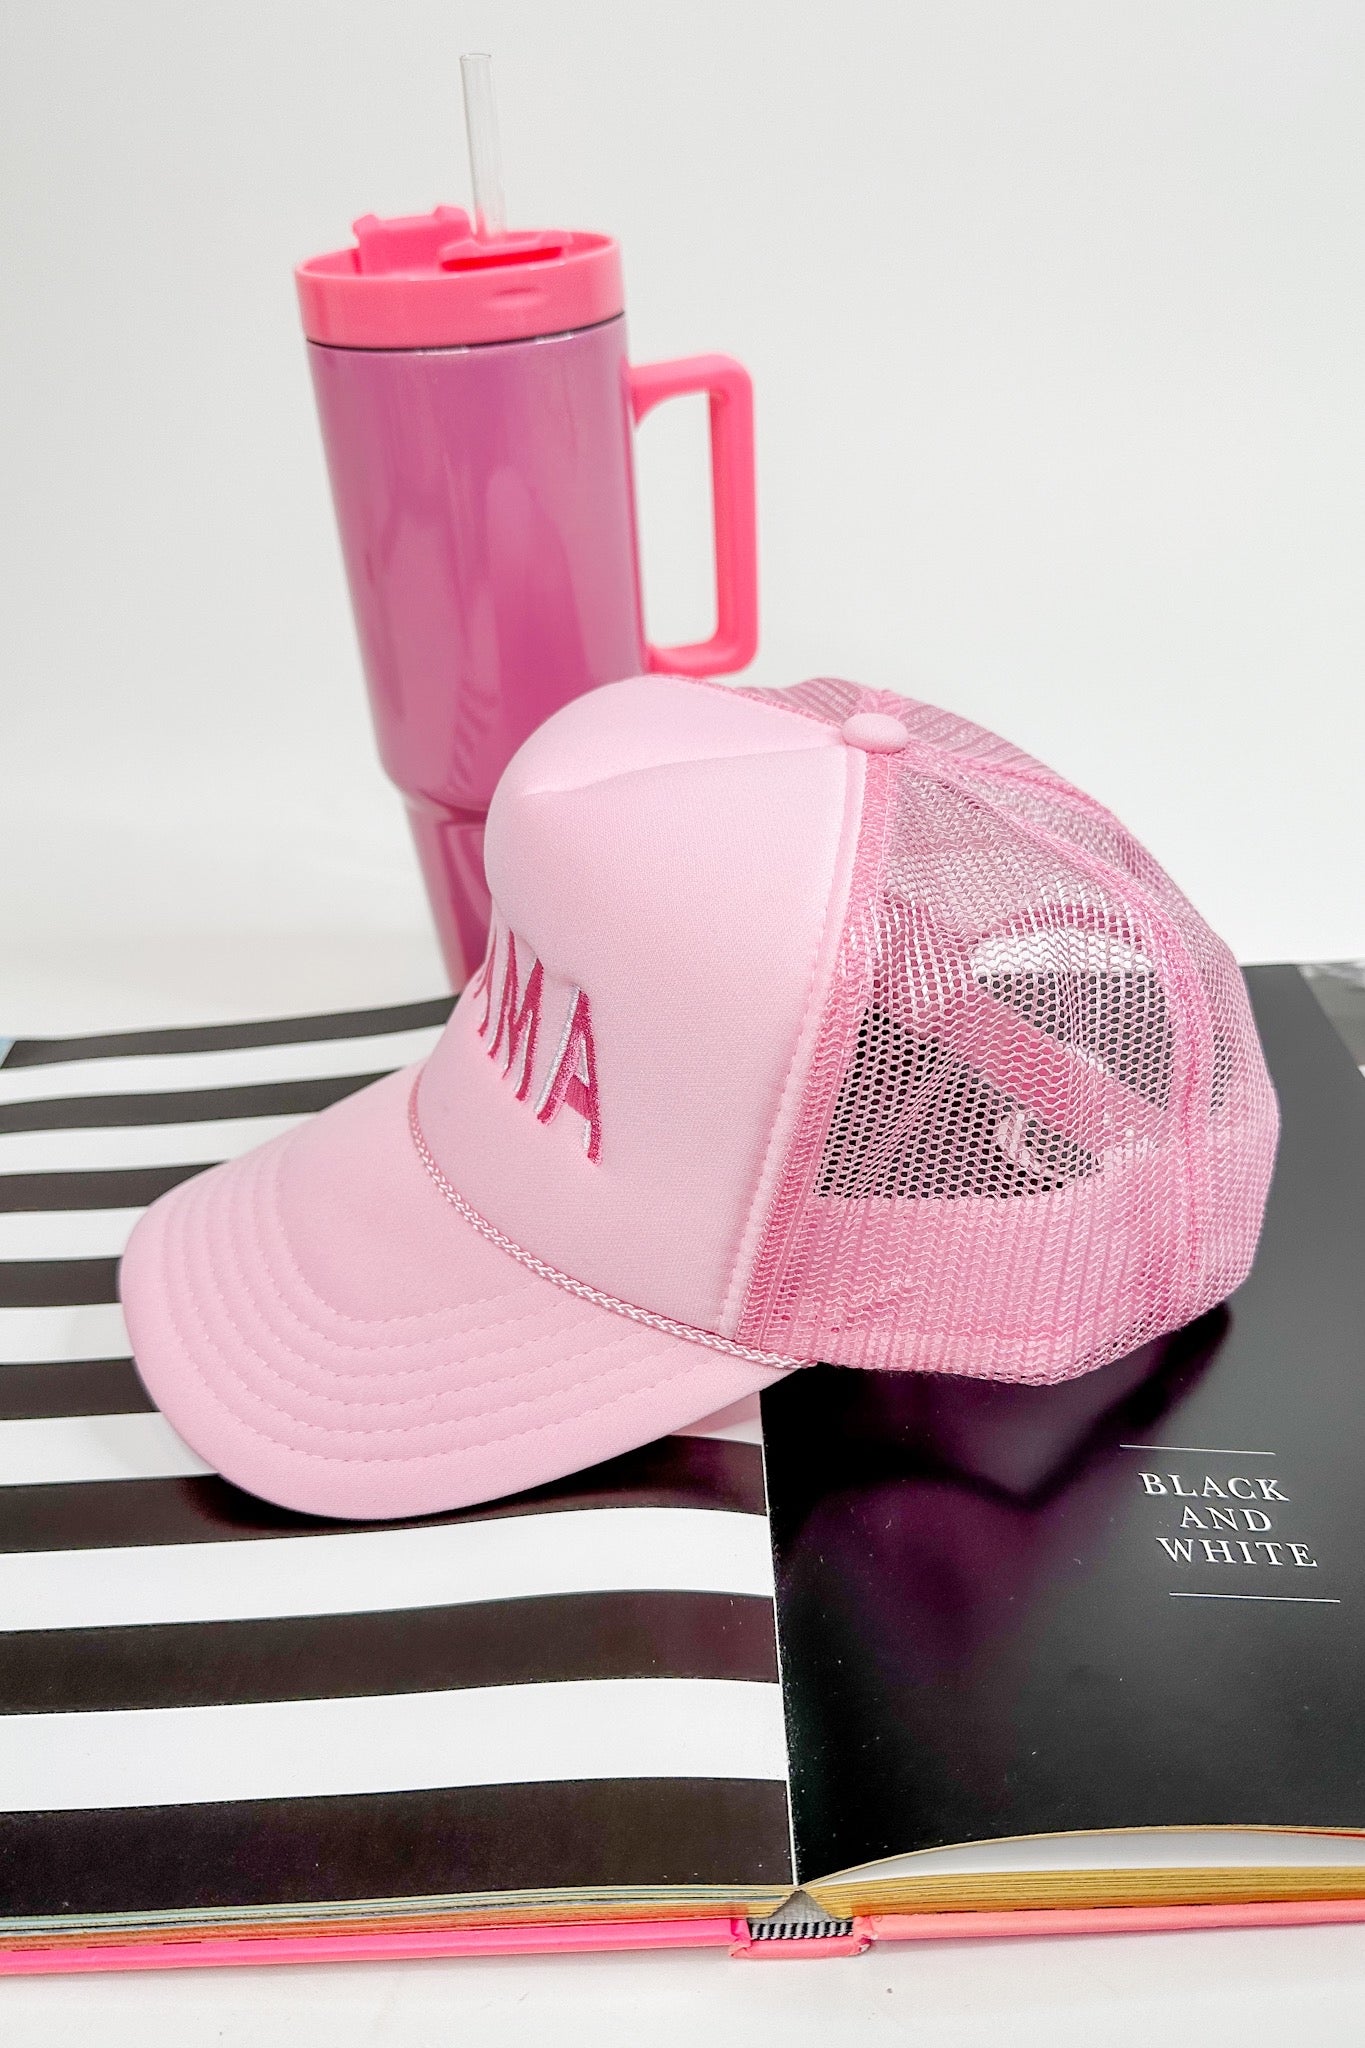 Mama Embroidered Pink Trucker Hat